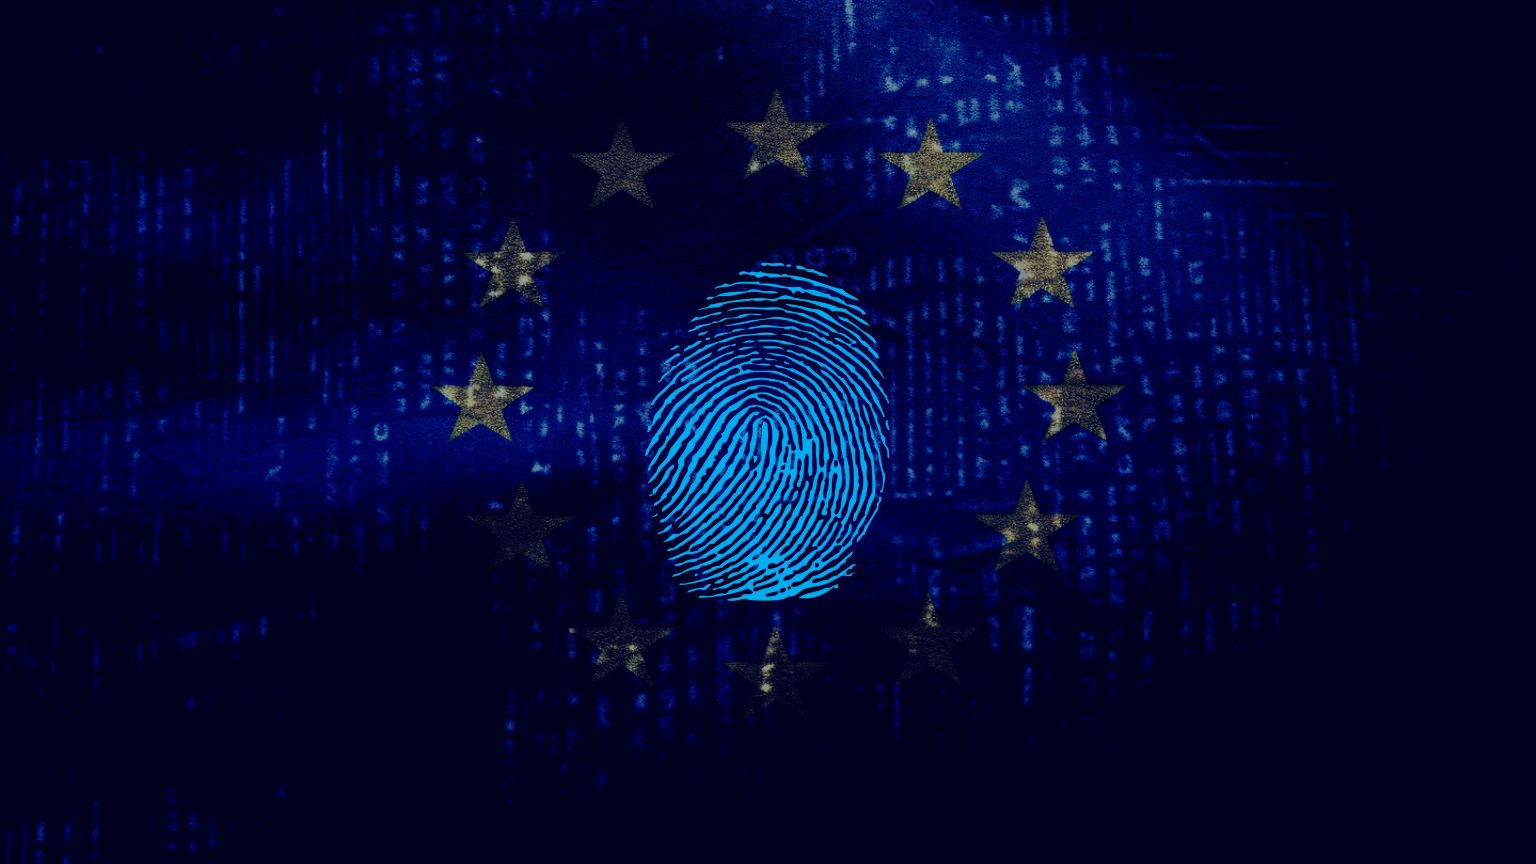 EU Court To Rule on Legality of Including Biometrics on ID Cards